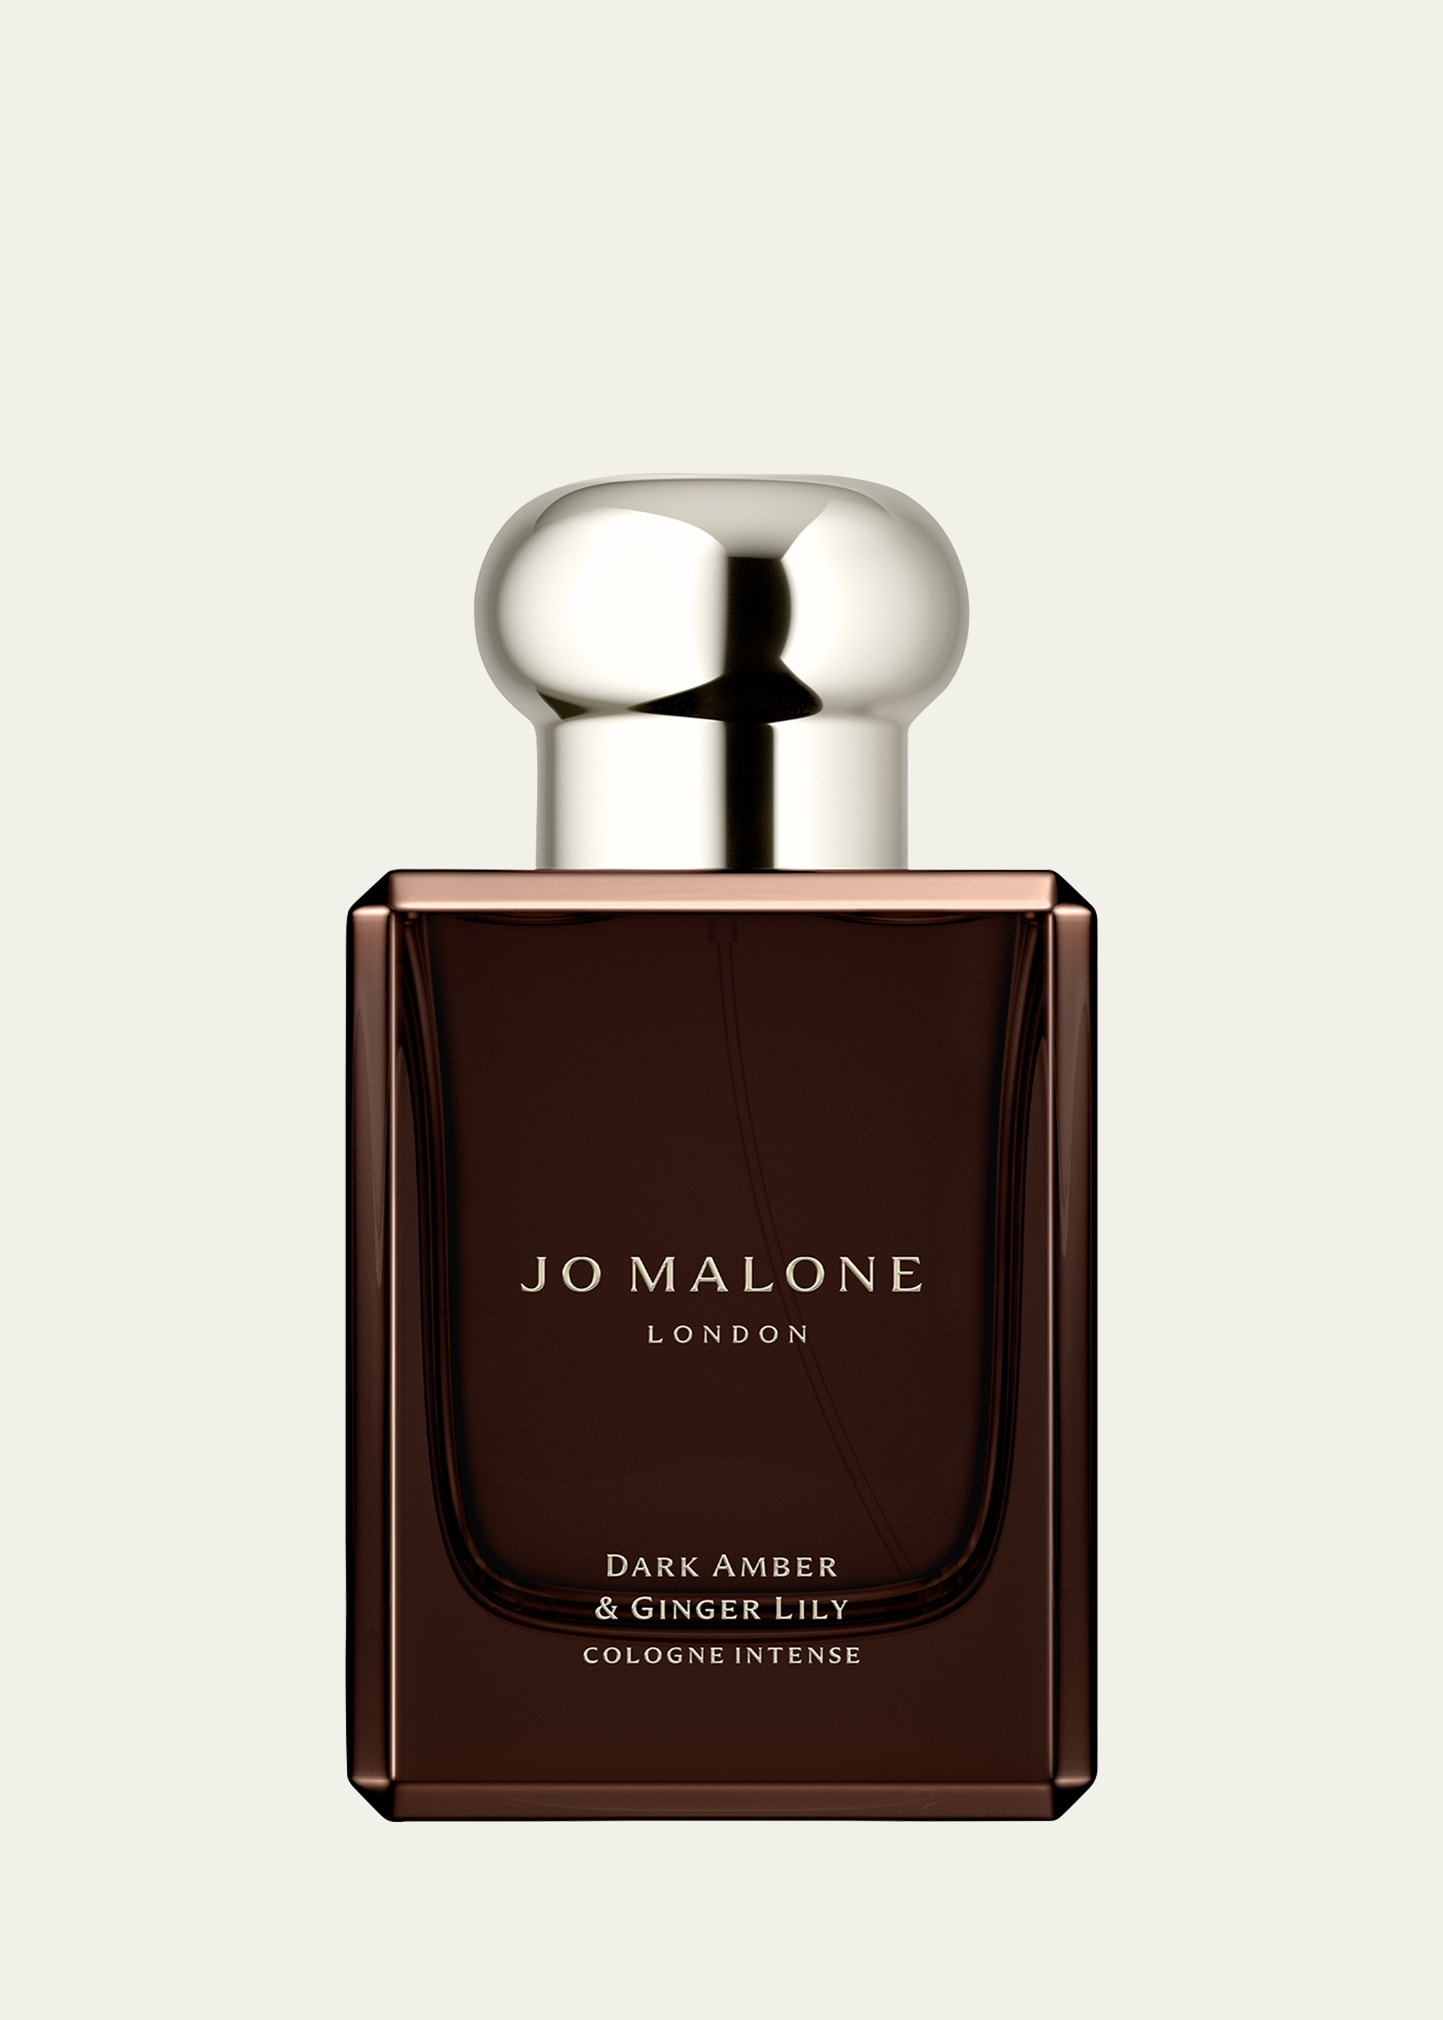 Jo Malone London Dark Amber And Ginger Lily Cologne Intense, 1.7 Oz.